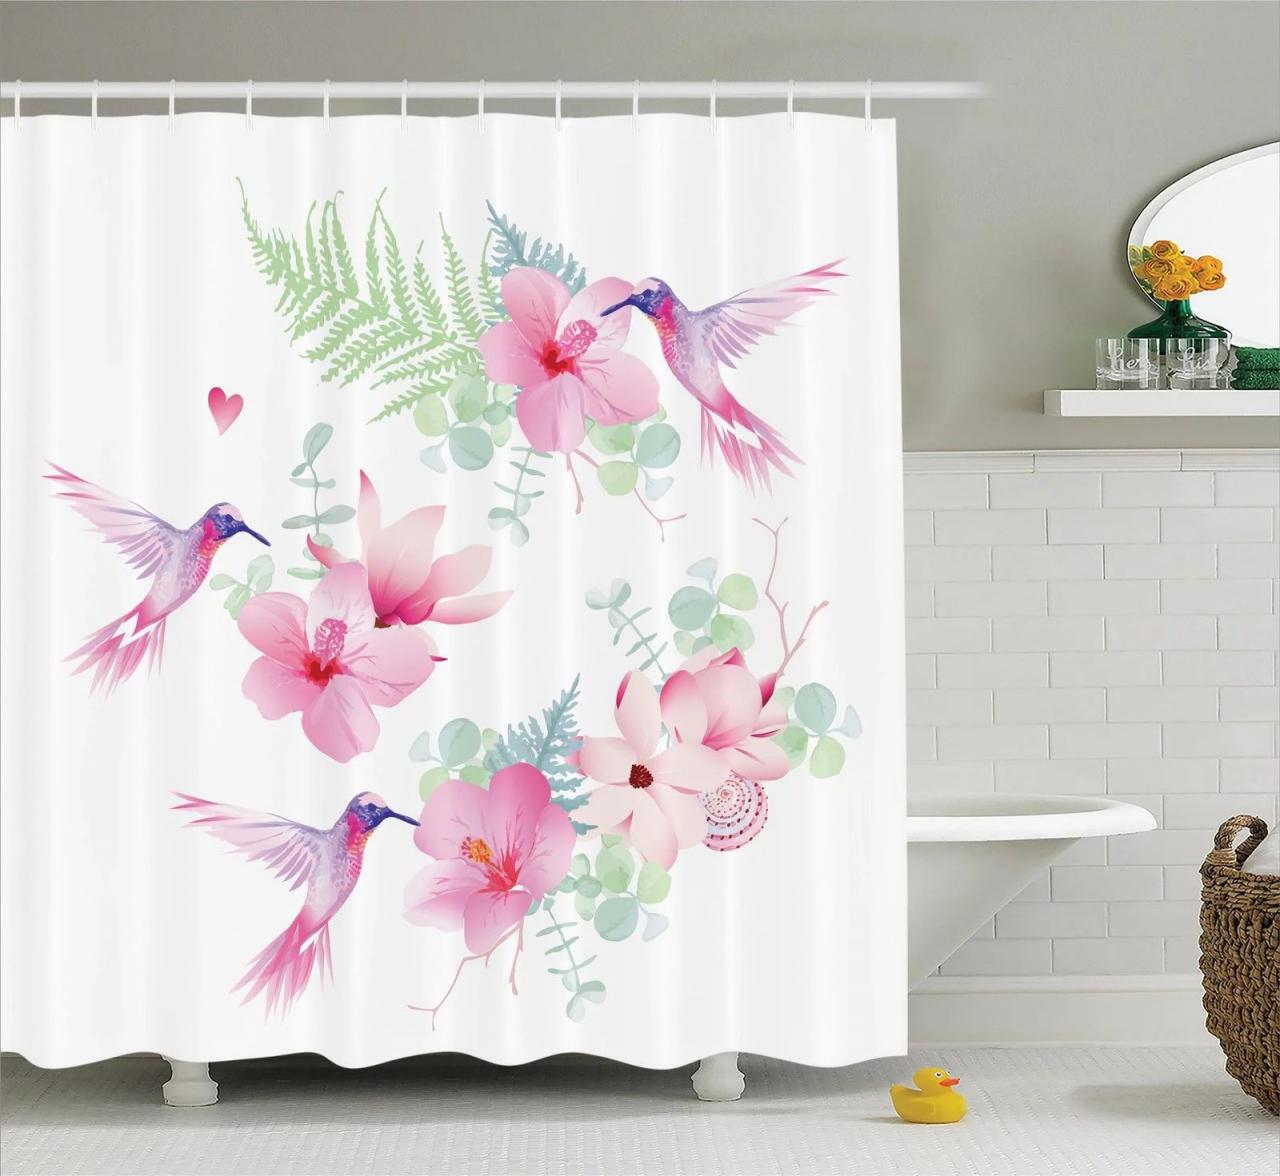 Hummingbirds Decorations Shower Curtain Set, Tropical Flowers With